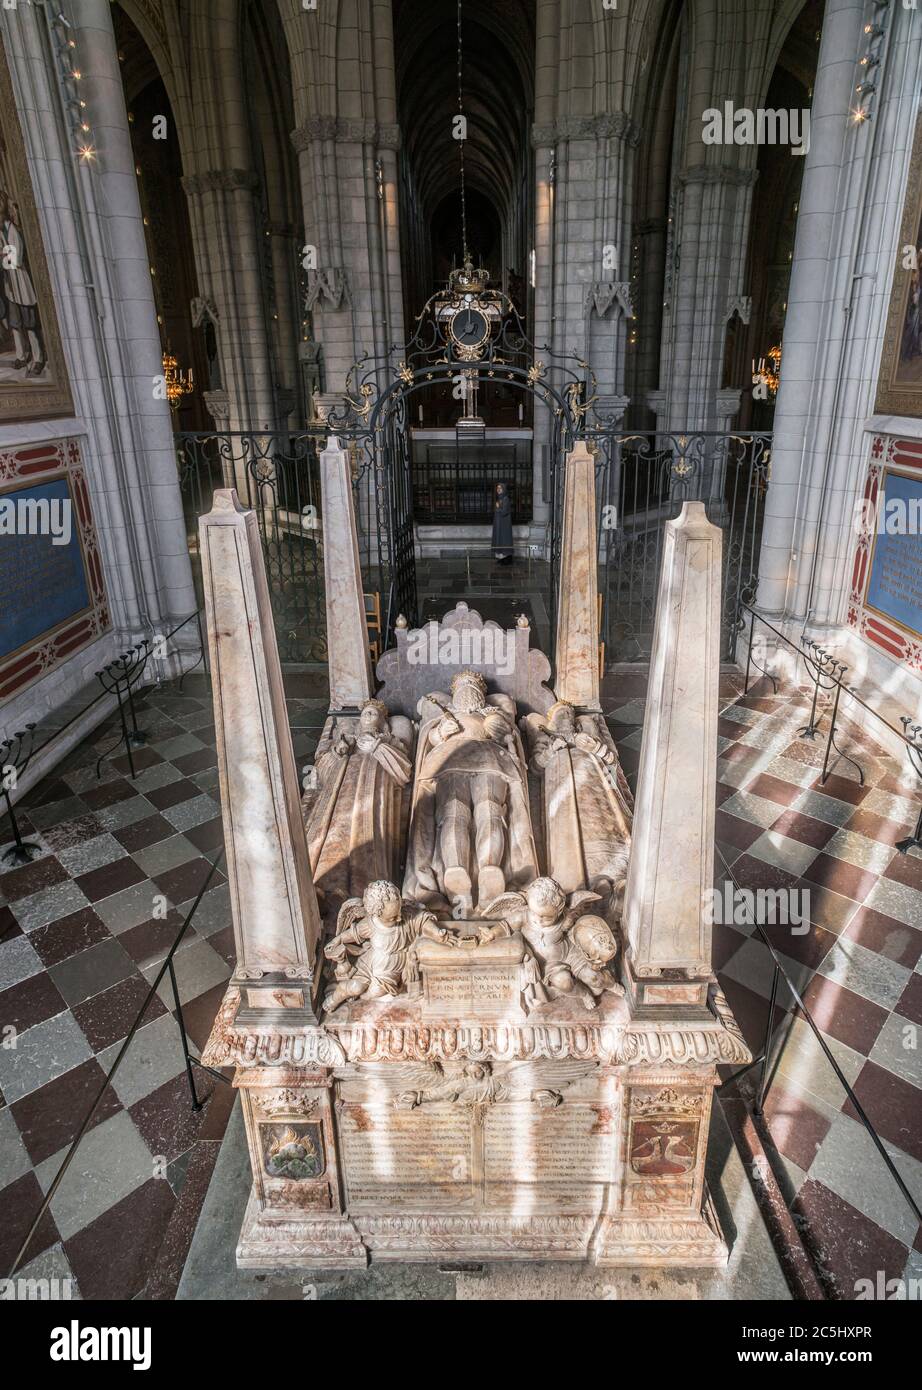 The grave of Gustav Vasa (Gustav I of Sweden) and two of his wifes, interior of the Uppsala Cathedral (Domkyrka). Uppsala, Sweden, Scandinavia. Stock Photo